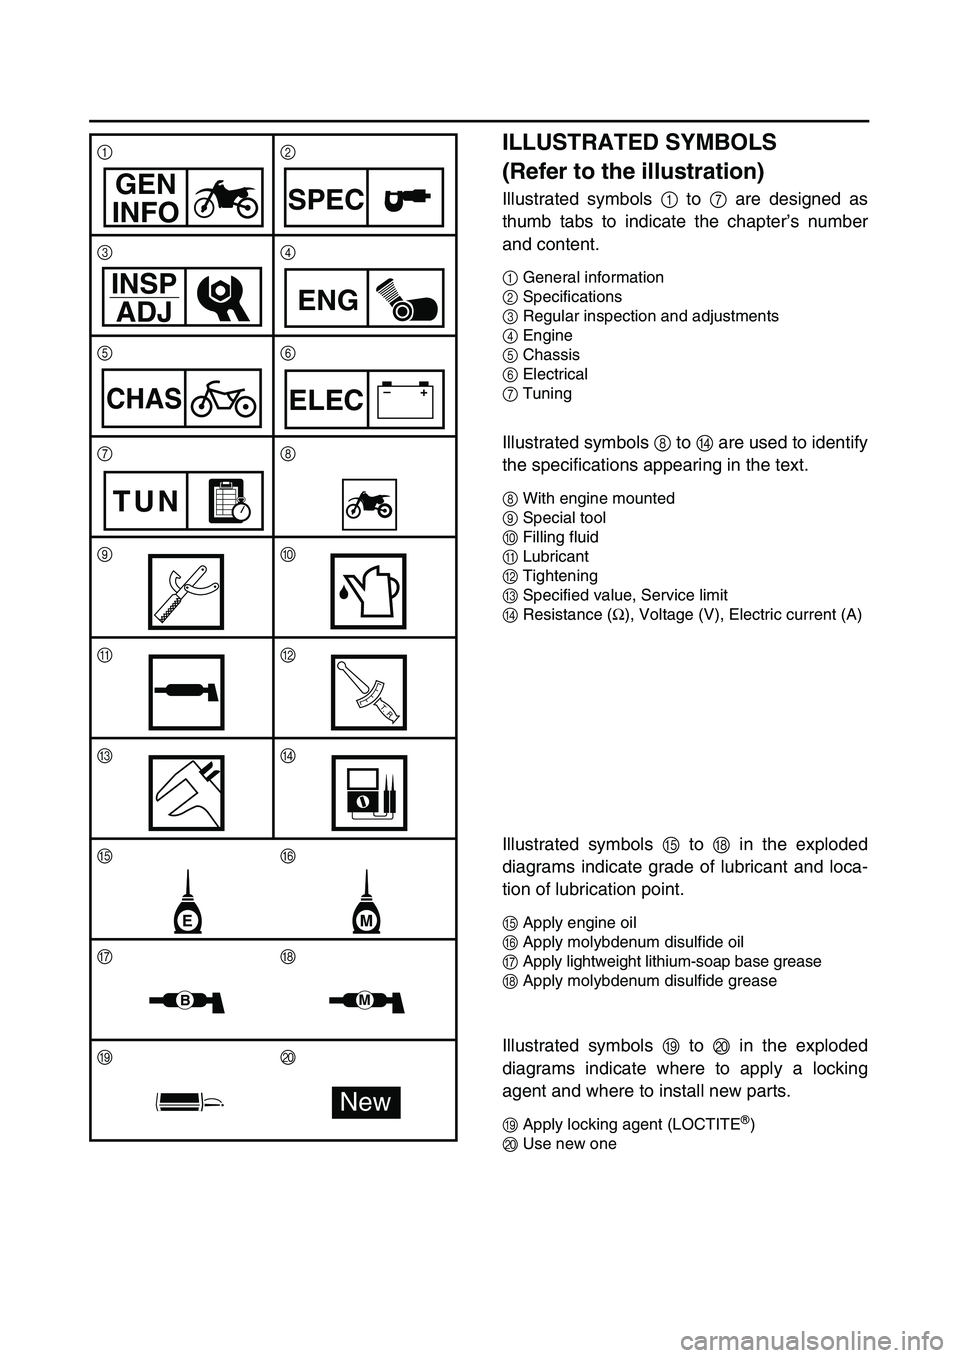 YAMAHA WR 400F 2002  Owners Manual  
ILLUSTRATED SYMBOLS 
(Refer to the illustration) 
Illustrated symbols   
1  
 to   
7  
 are designed as
thumb tabs to indicate the chapter’s number
and content. 
1  
General information  
2  
Spe